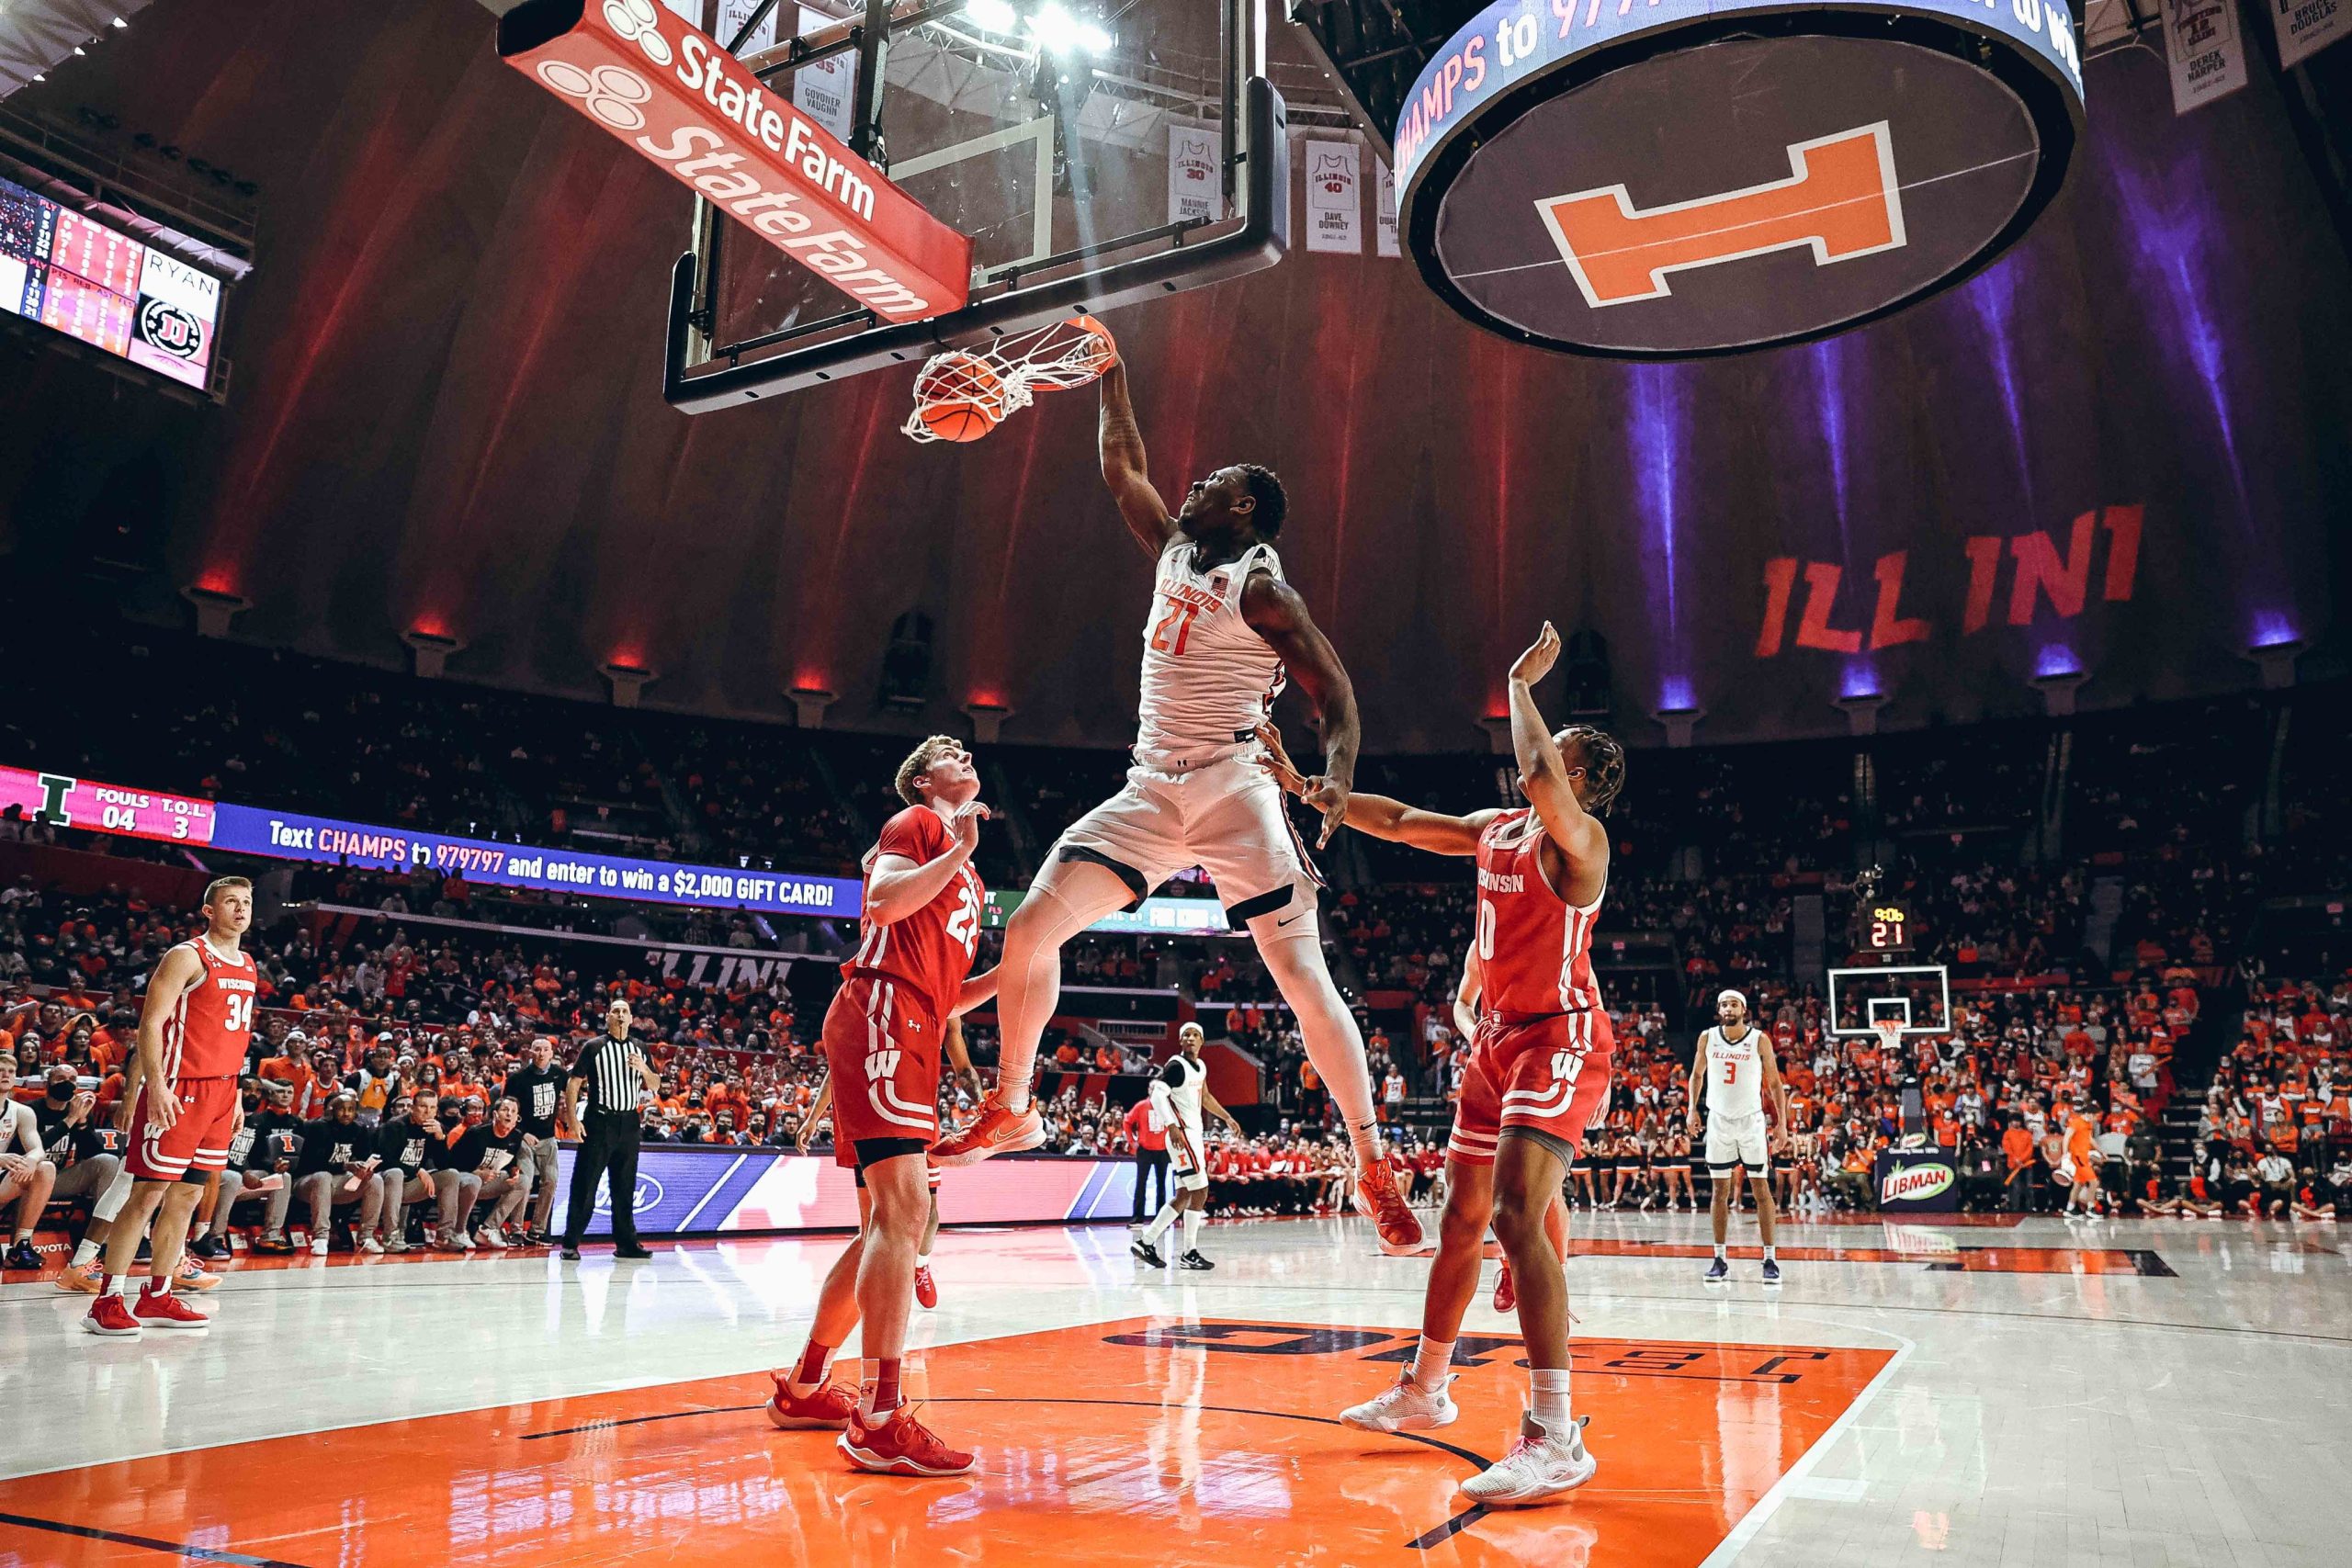 You've Been Kofi'd!  Illini Make A Statement in Dominant Win Over Badgers